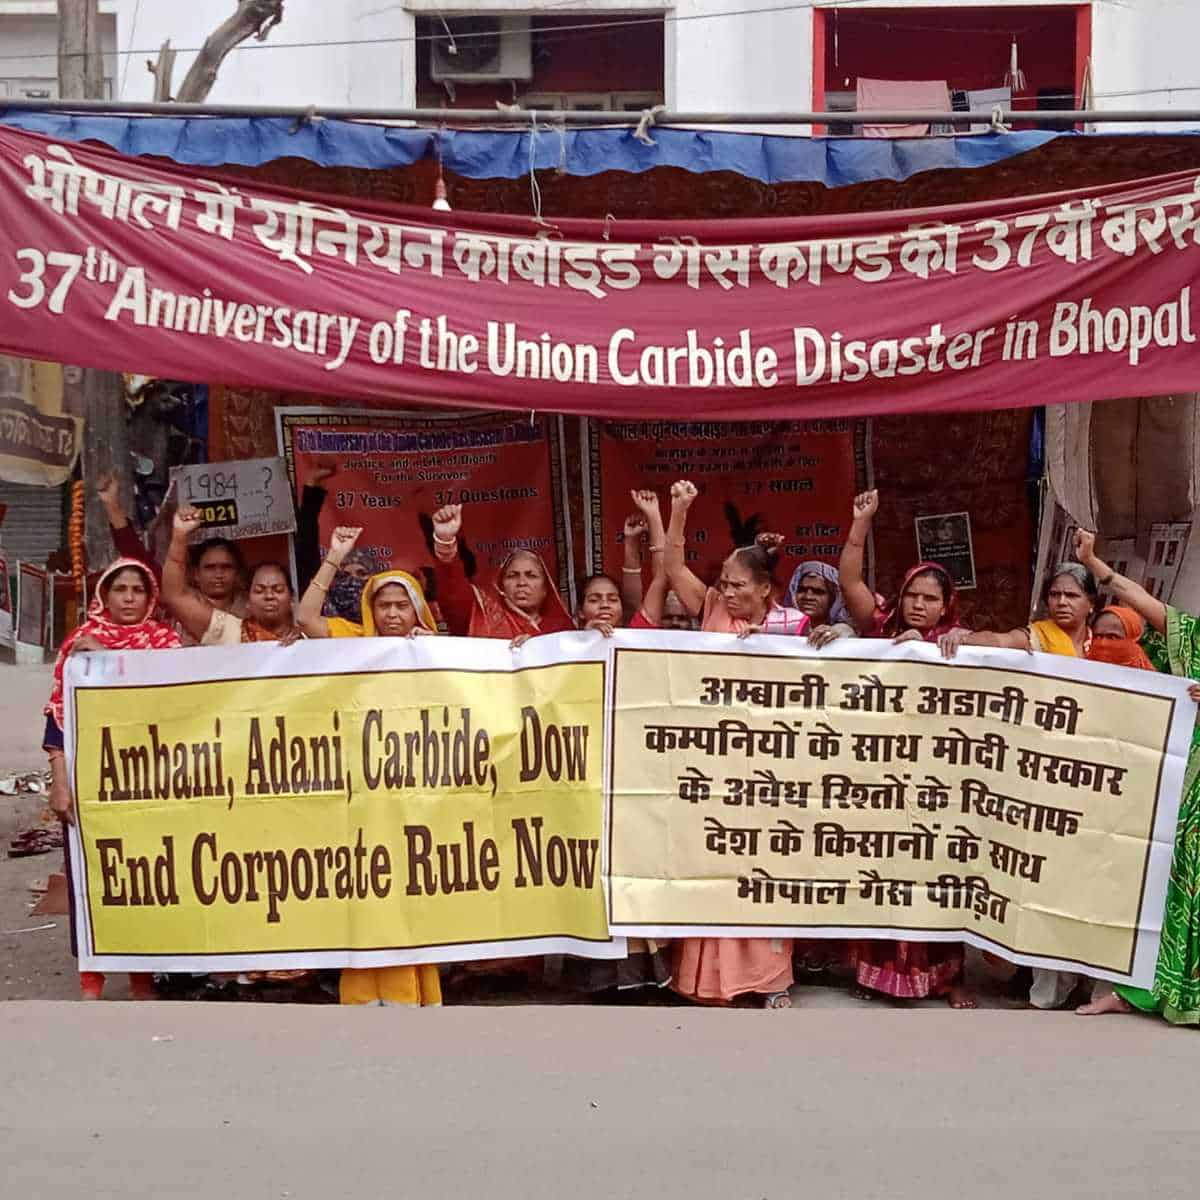 Agitating Bhopal gas victims of 1984 Union Carbide disaster